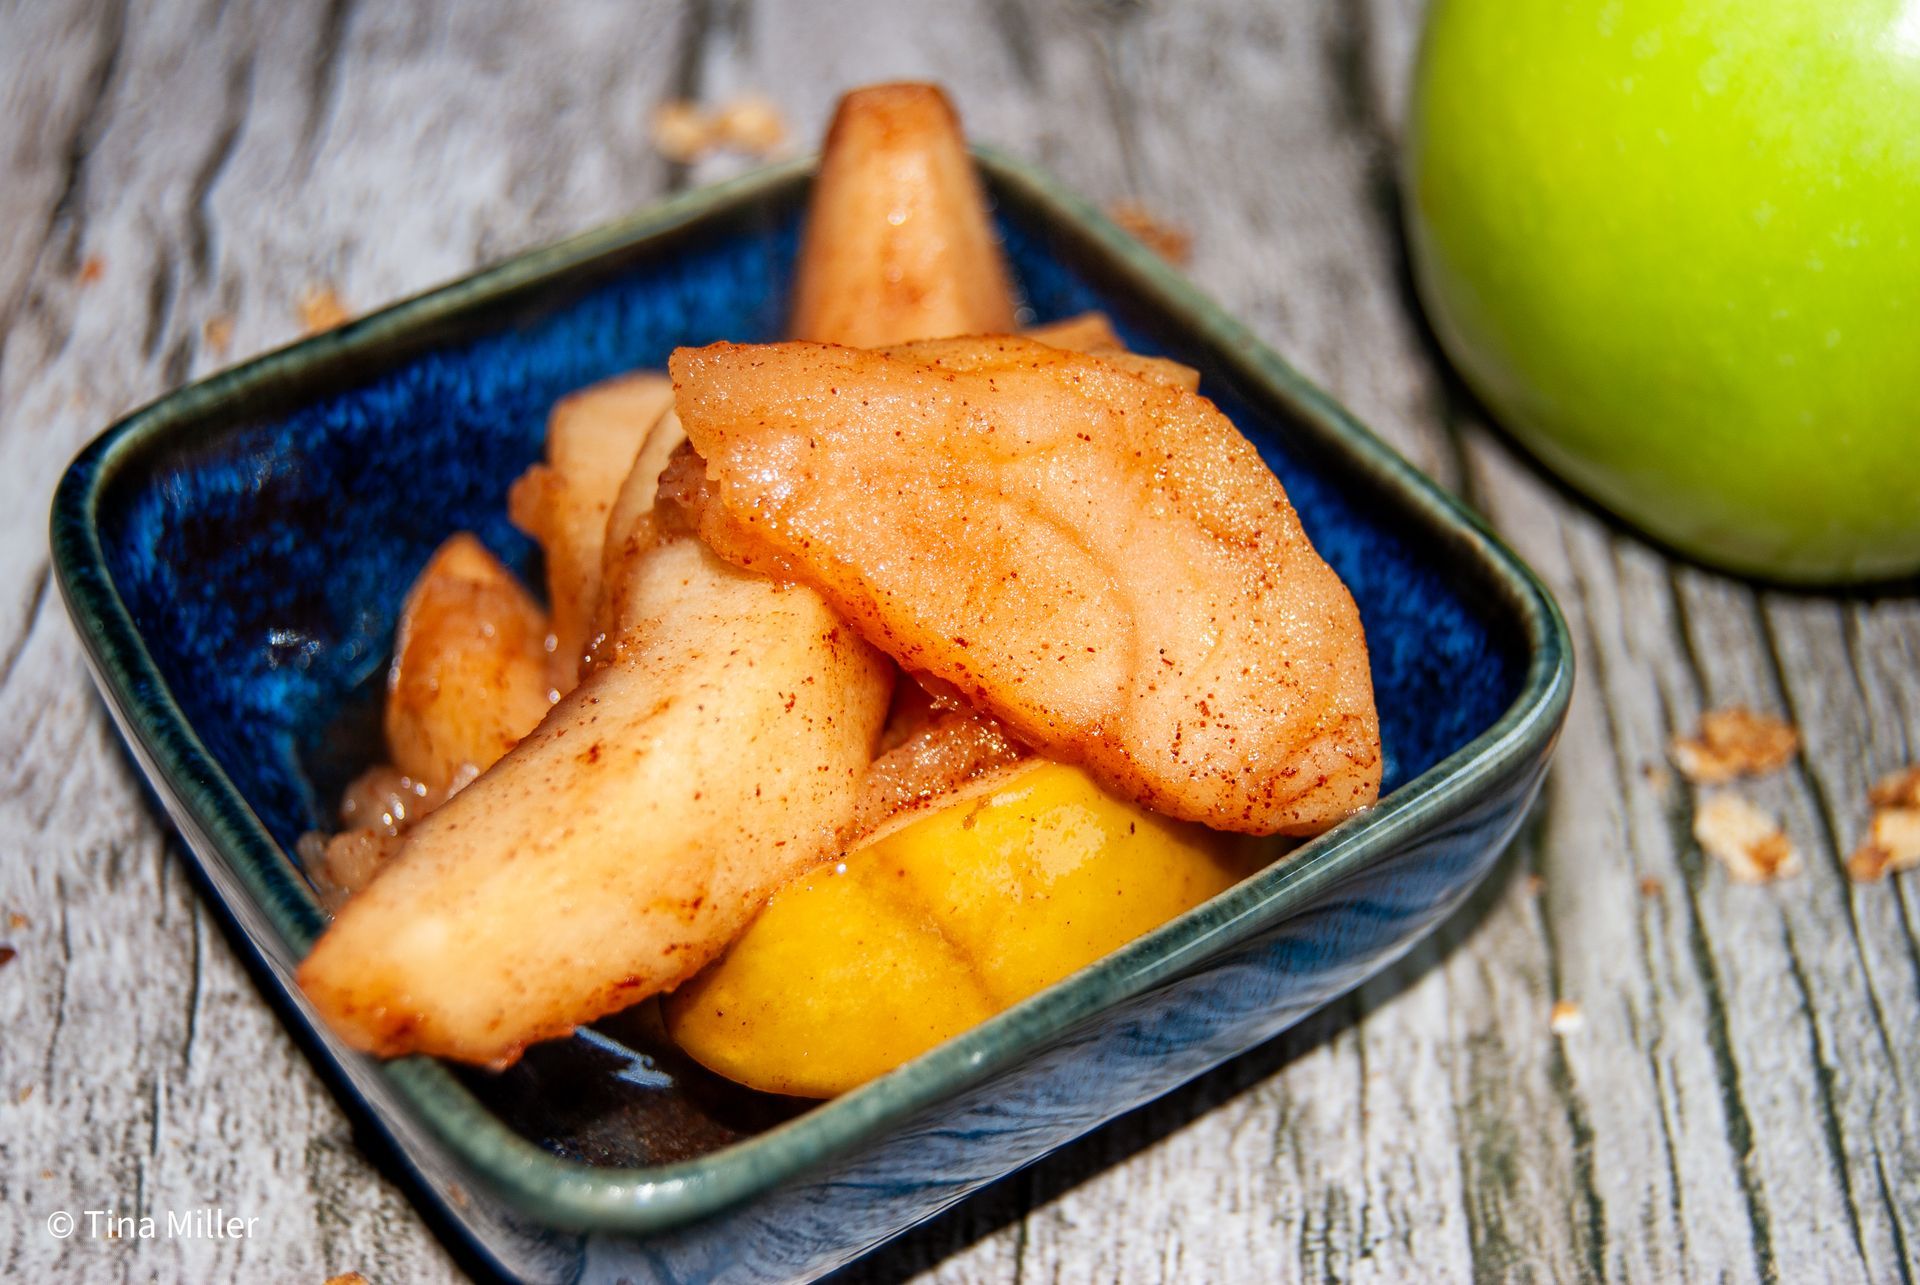 Slices of cinnamon apples in a small blue ceramic bowl on a wooden table with a green apple.